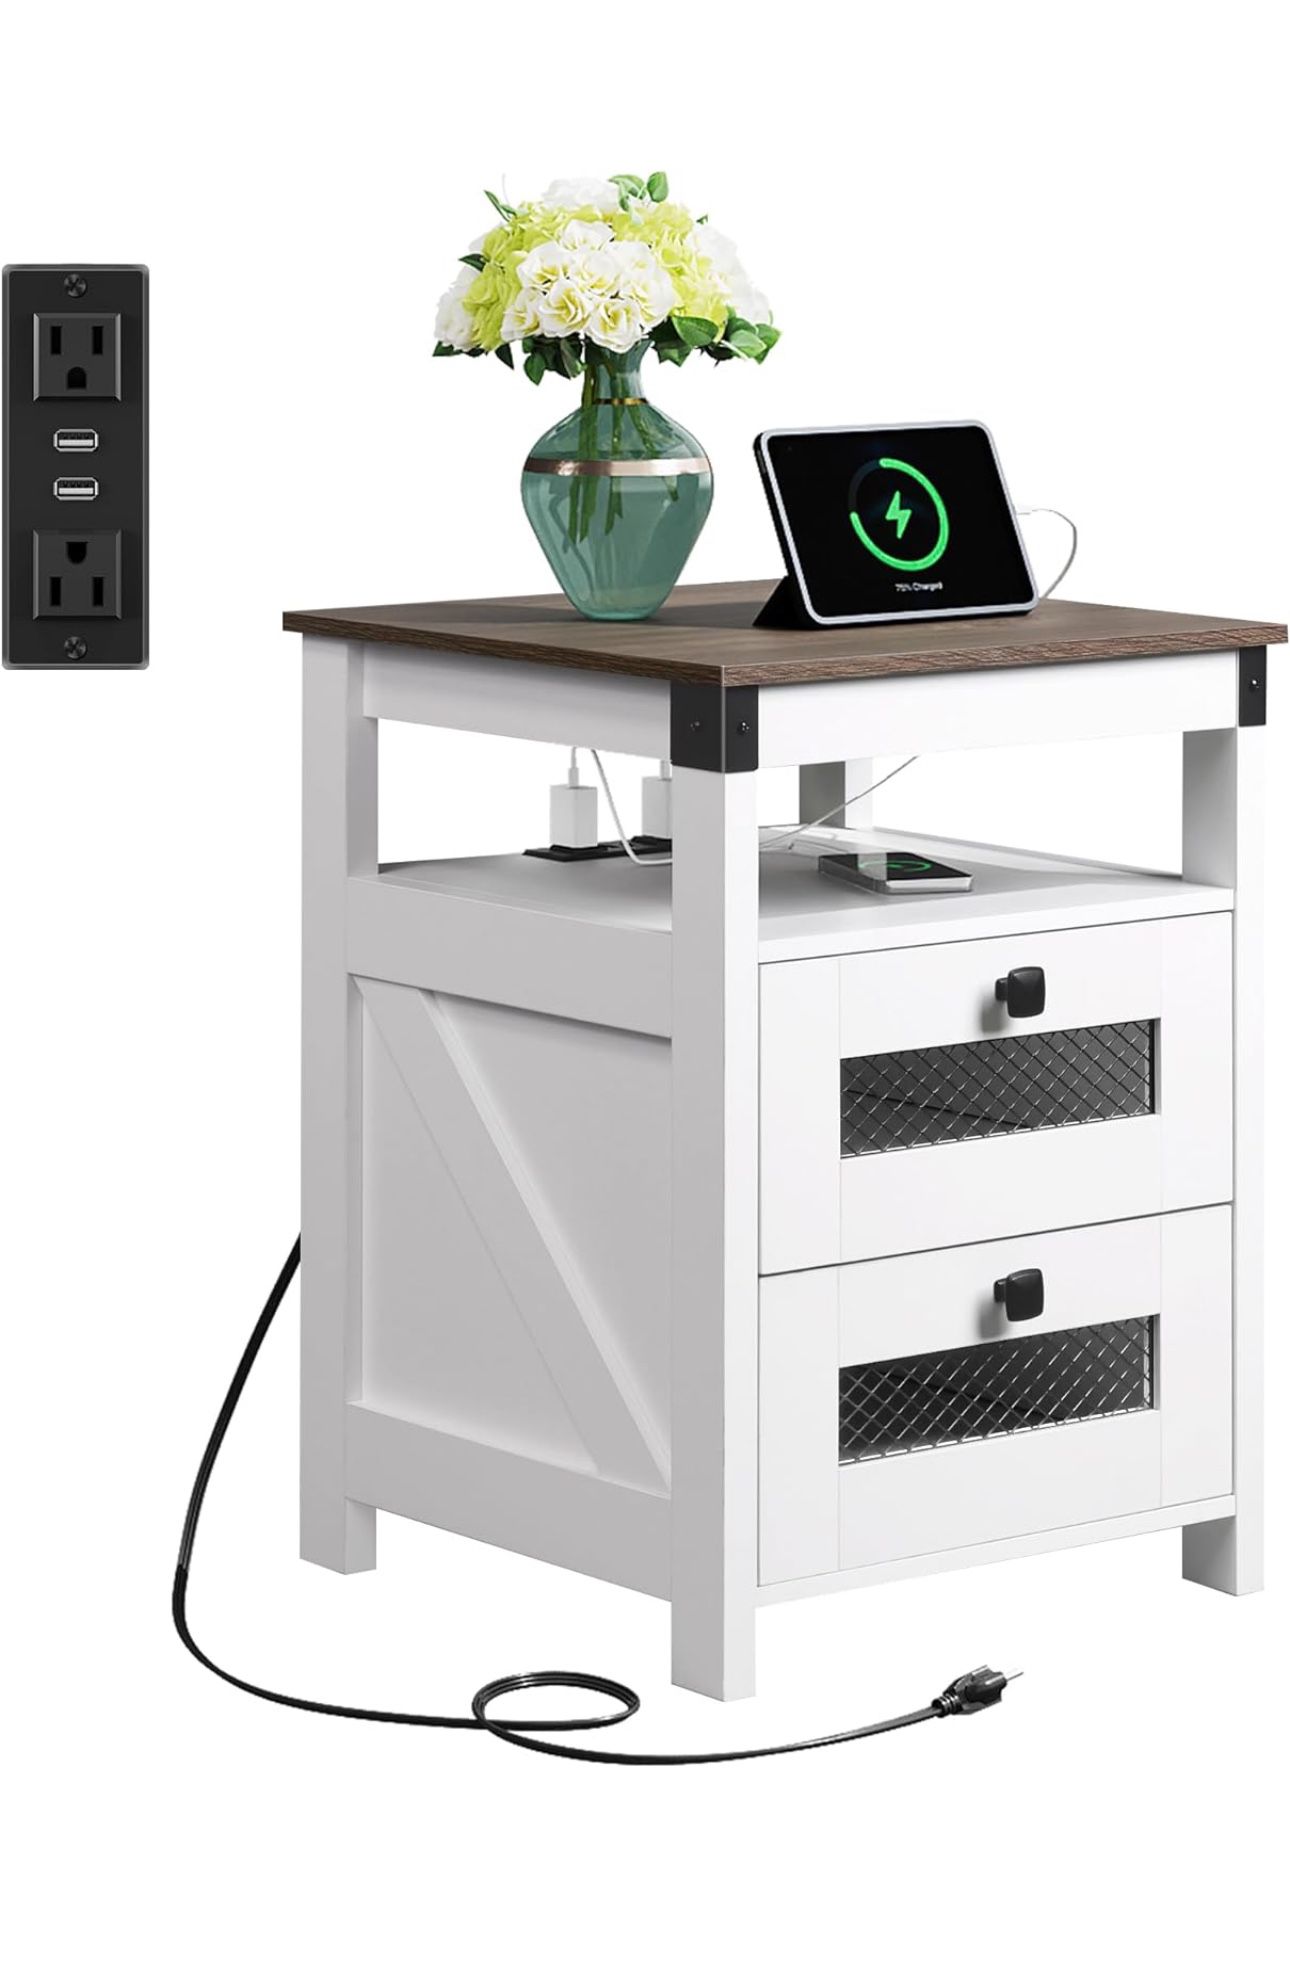 Brand New Farmhouse Nightstand with Charging Station, White Bedside Table with Drawer and Storage Shelf, Sofa Table for Living Room with USB Ports and